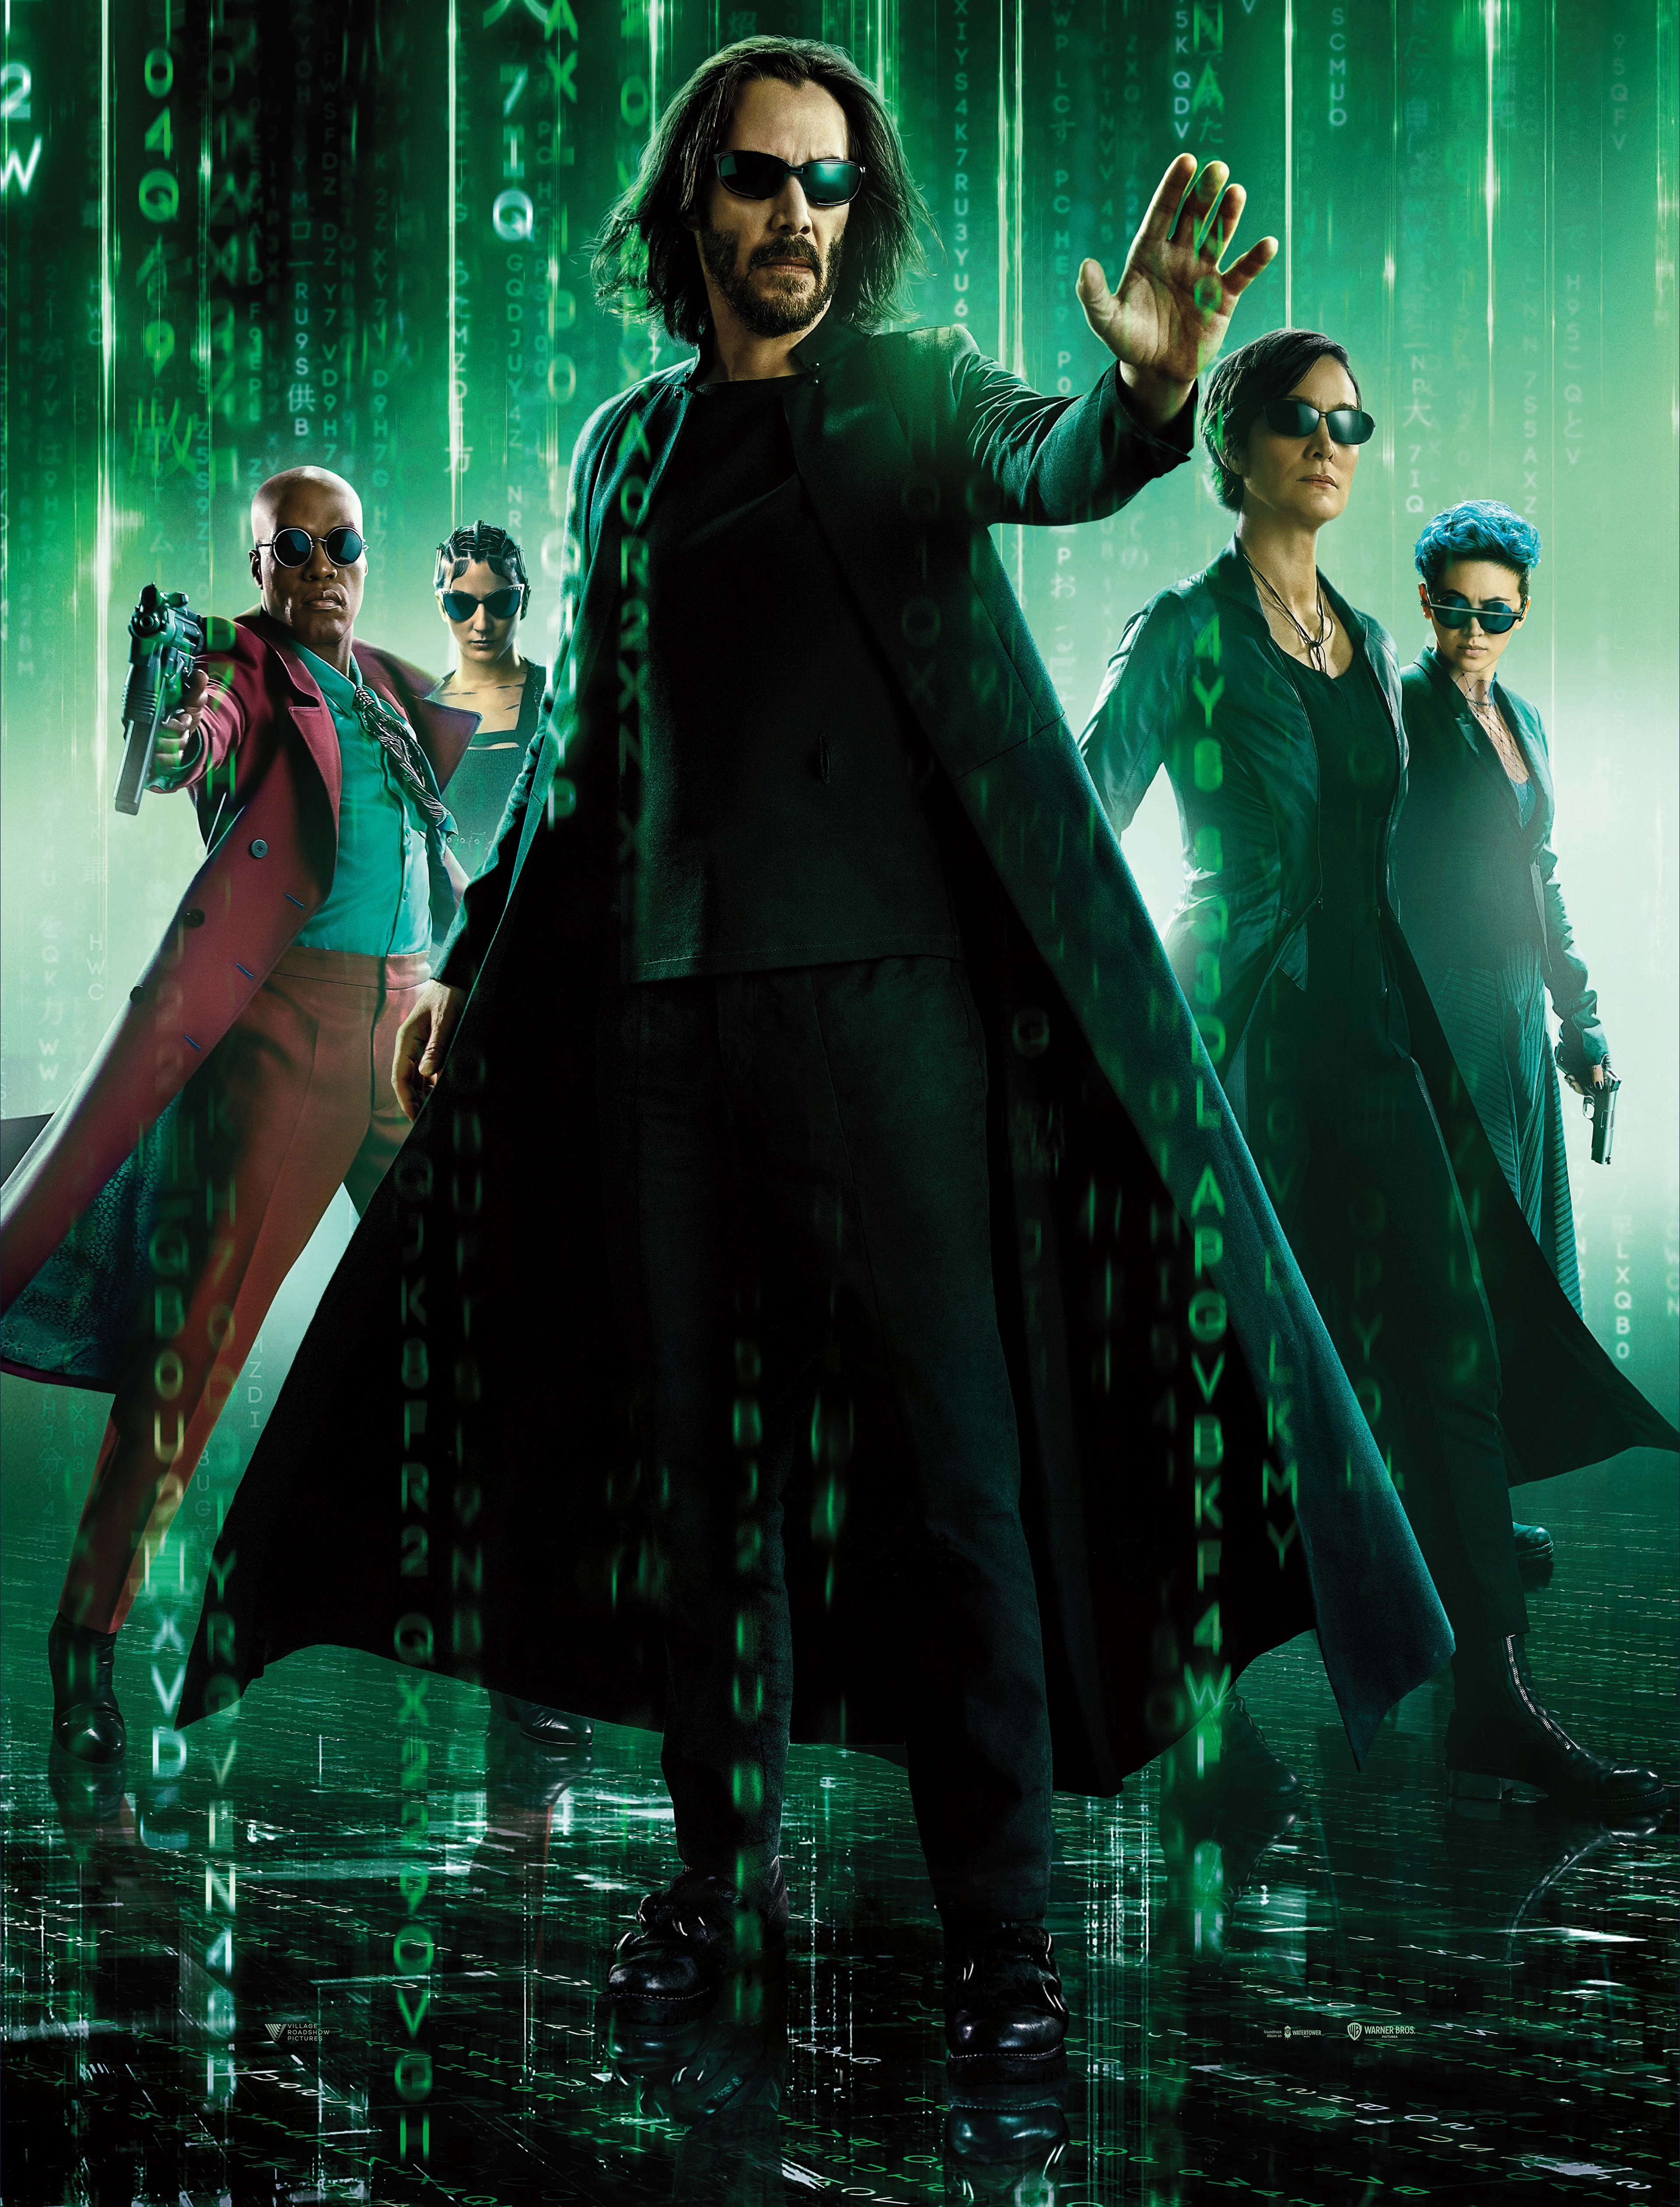 HD wallpaper, 2021 Movies, Movie Poster, The Matrix Resurrections, Trinity, Jessica Henwick, Keanu Reeves, Neo, Carrie Anne Moss